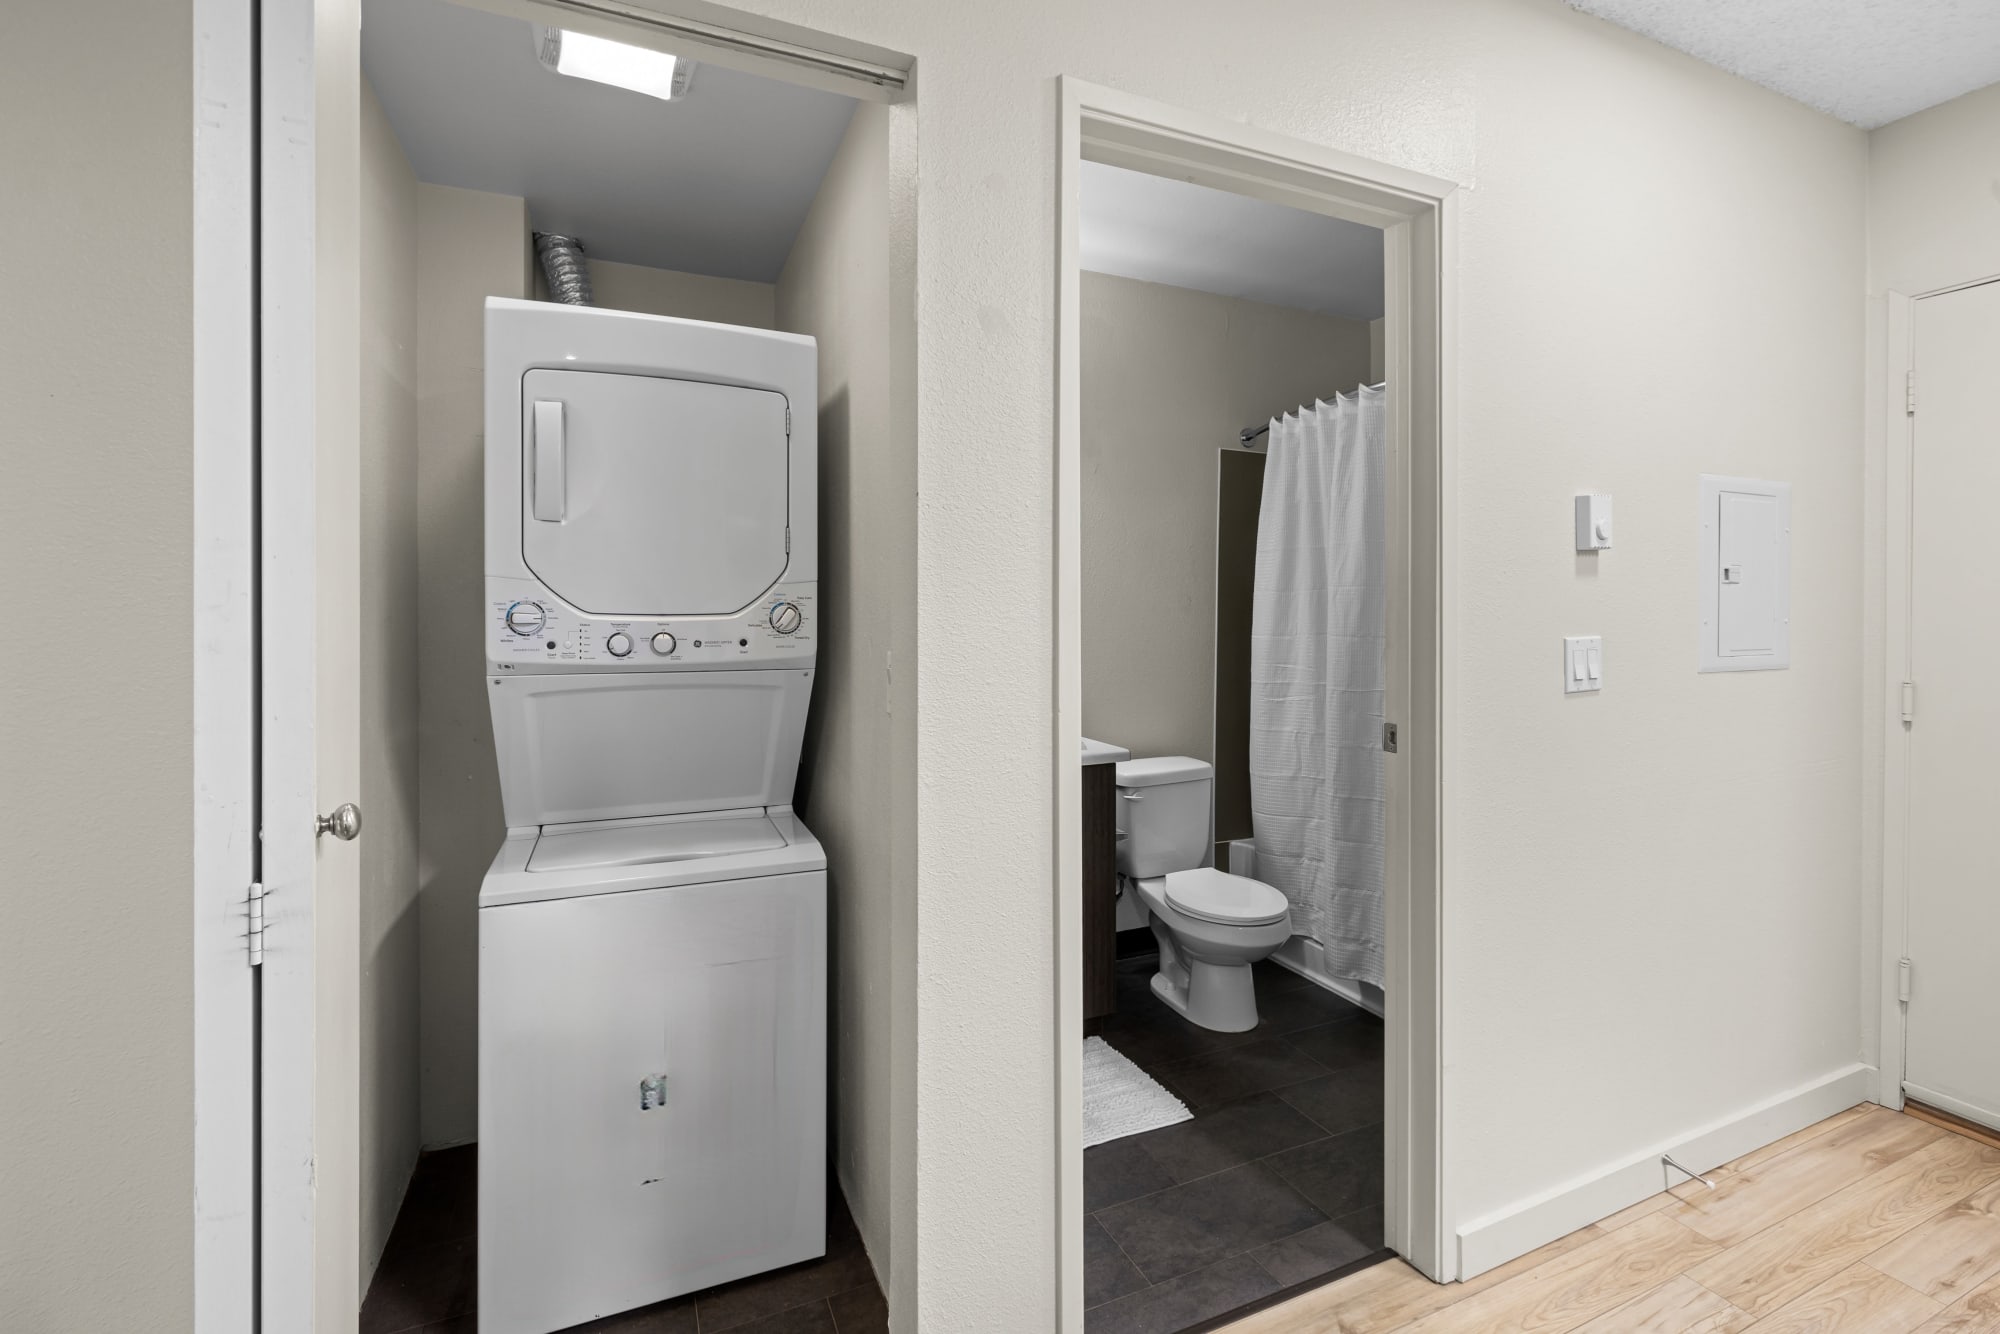 Bathroom and stacked washer and dryer at Karbon Apartments in Newcastle, Washington